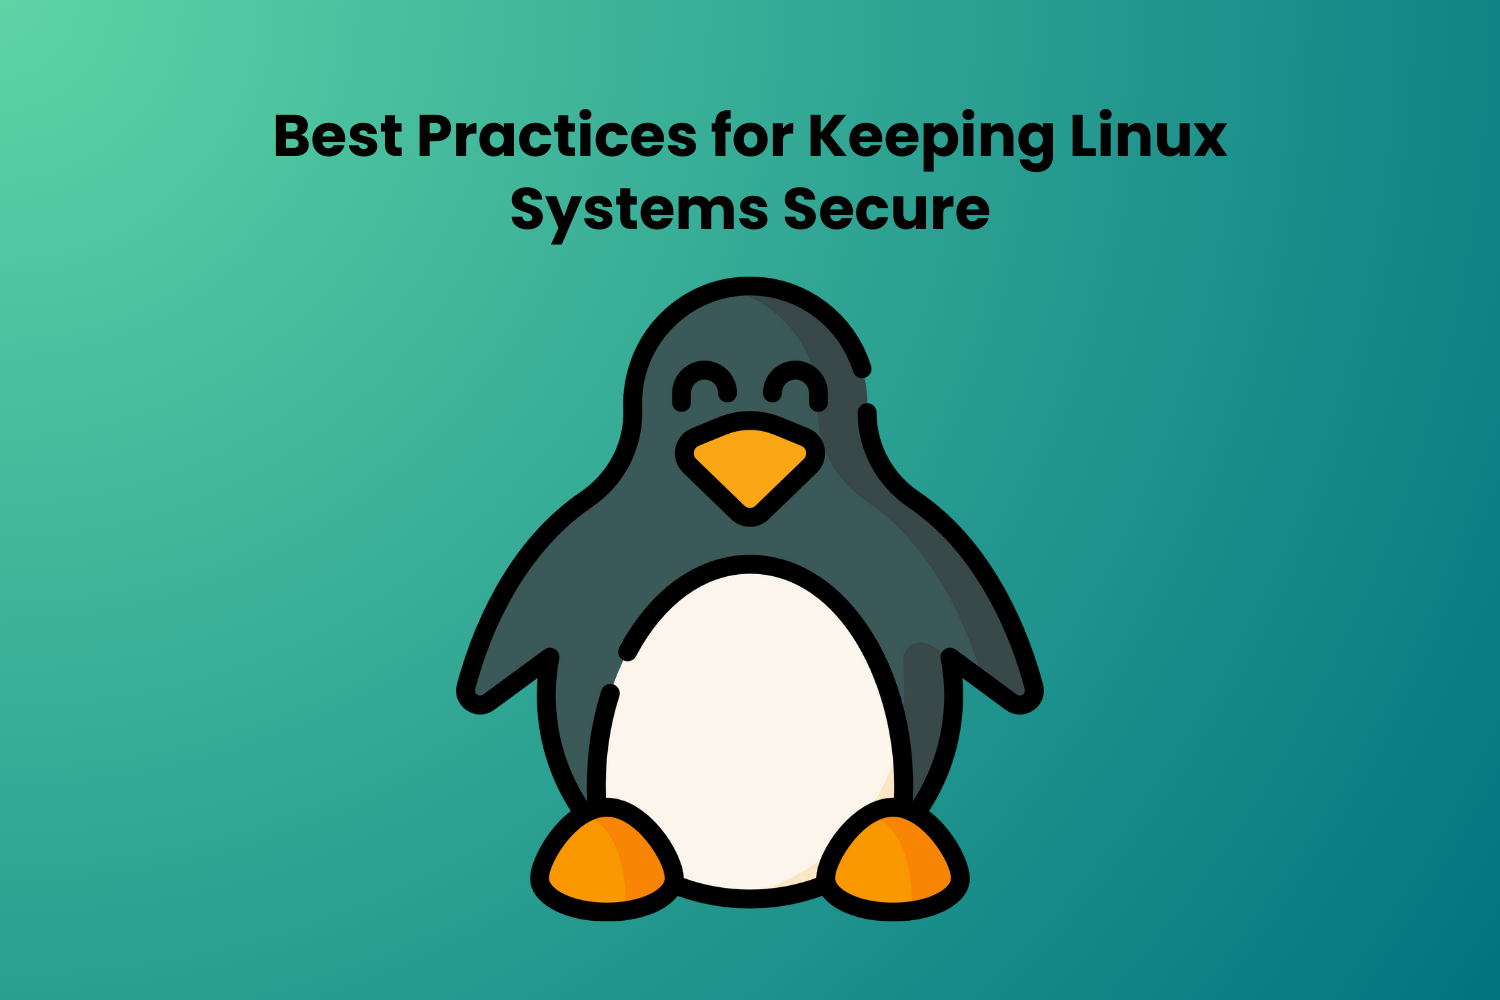 Best Practices for Keeping Linux Systems Secure